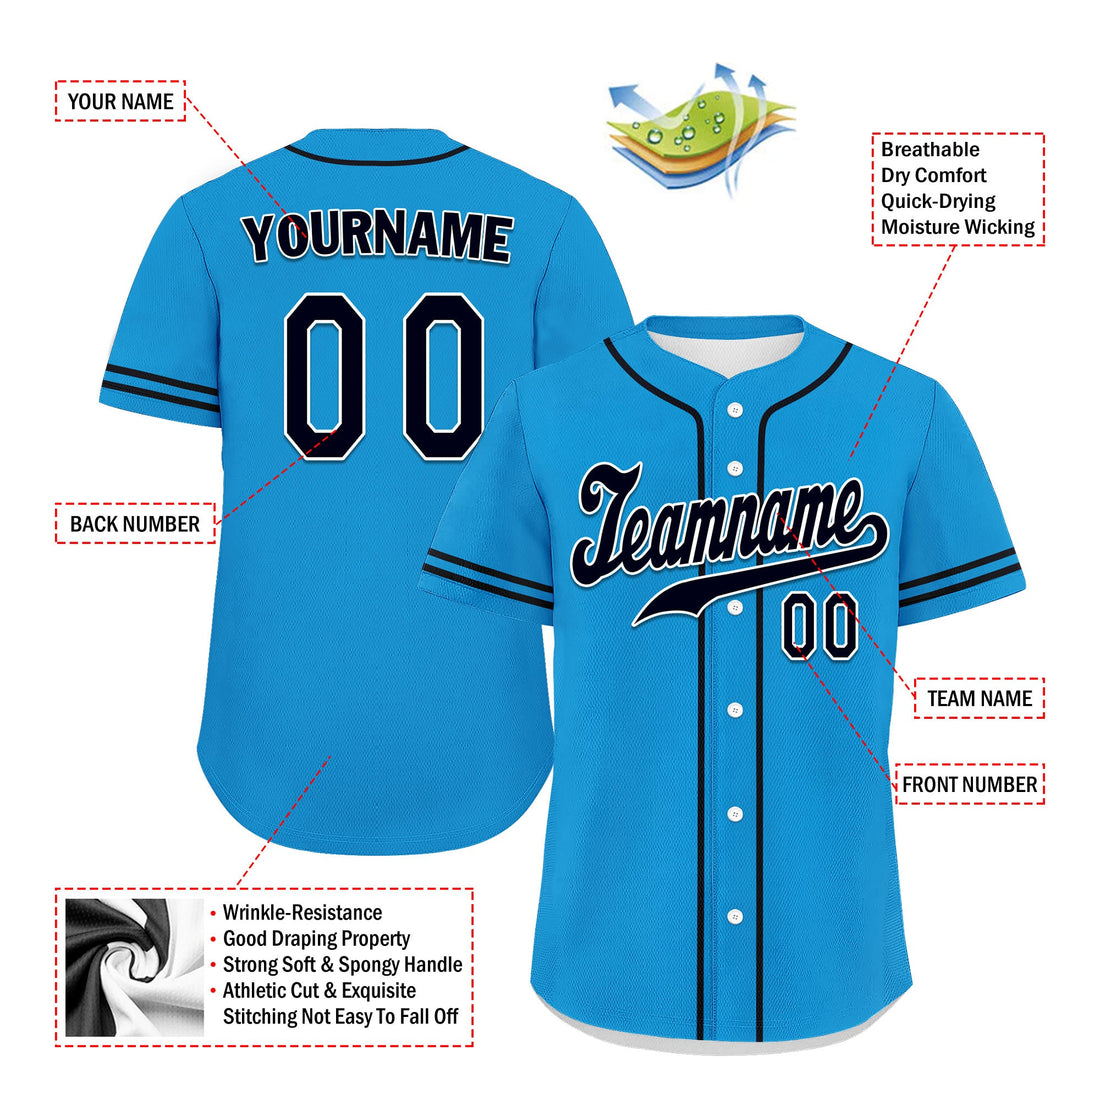 Custom Blue Classic Style Black Personalized Authentic Baseball Jersey UN002-bd0b00d8-bc